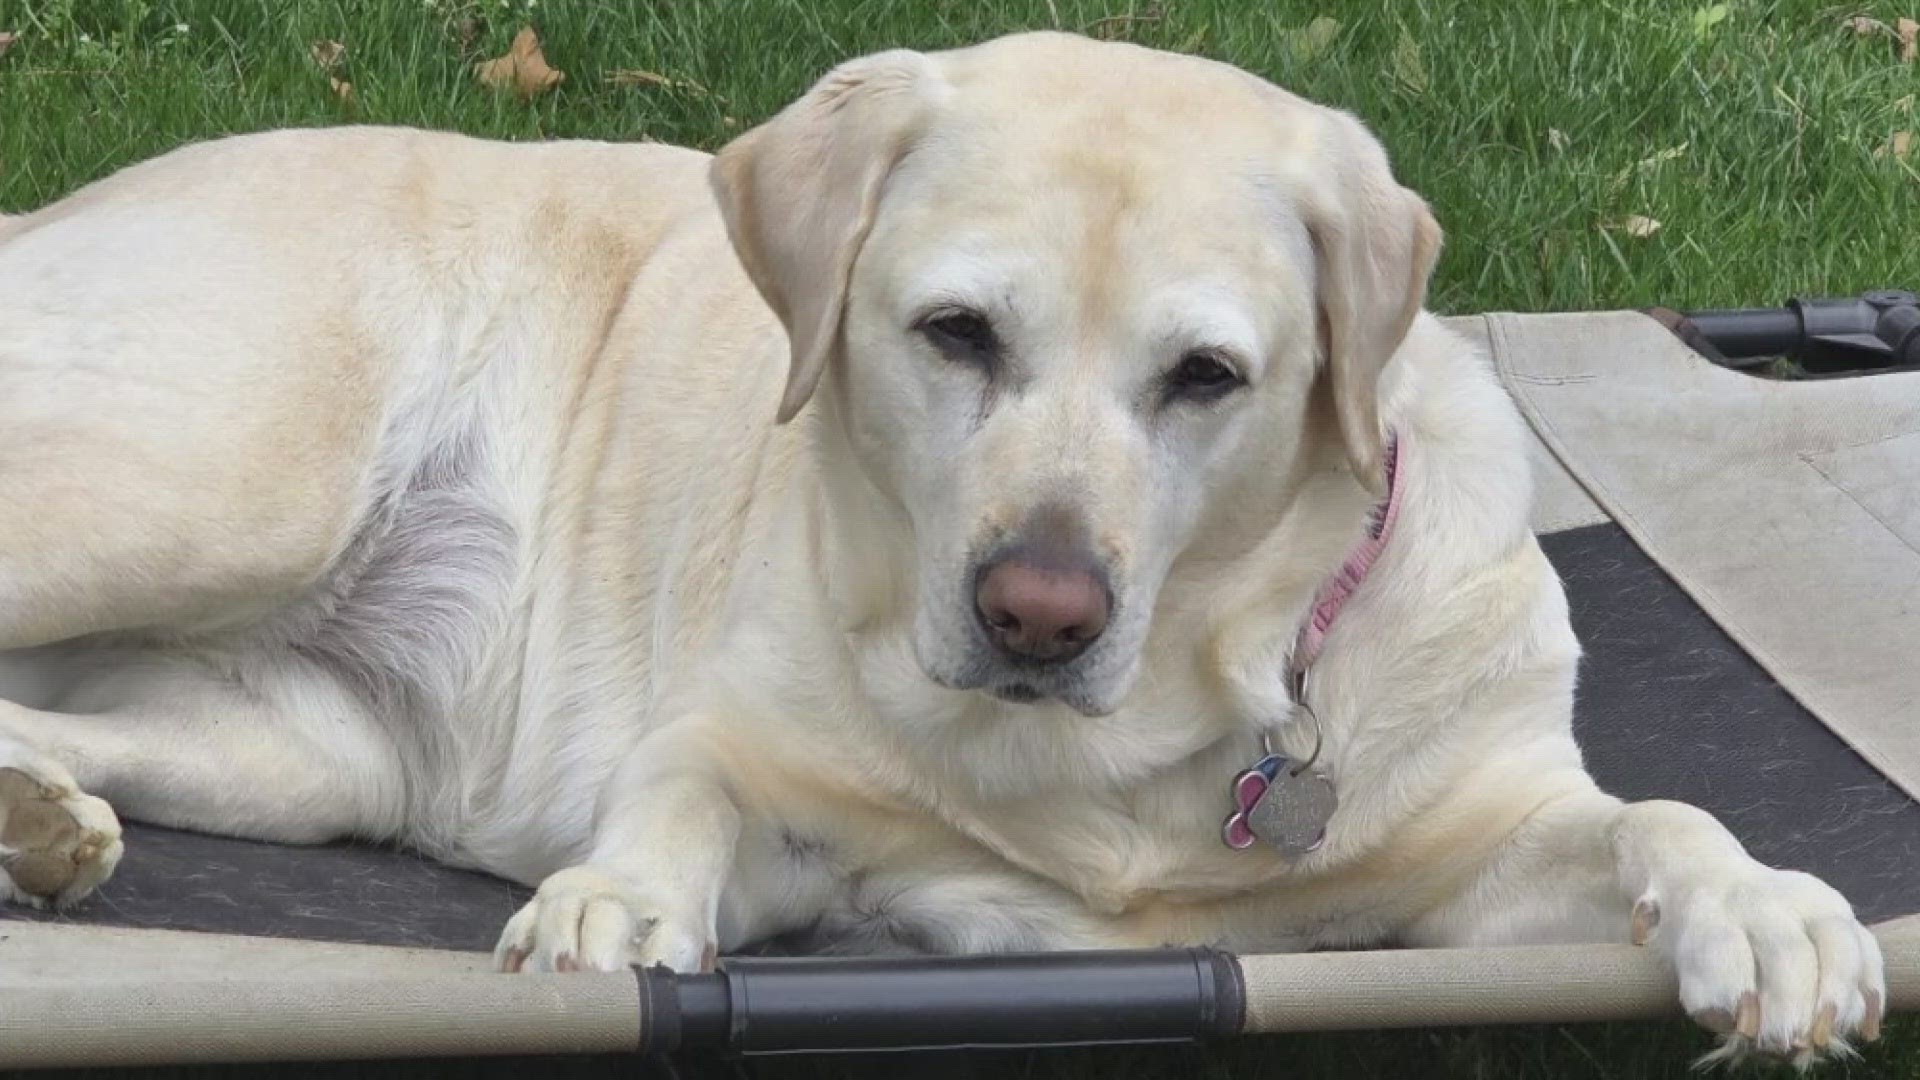 A Montgomery County family is singing their praises for their 8-year-old labrador, Molly, after they say she alerted them to a fire in their basement.